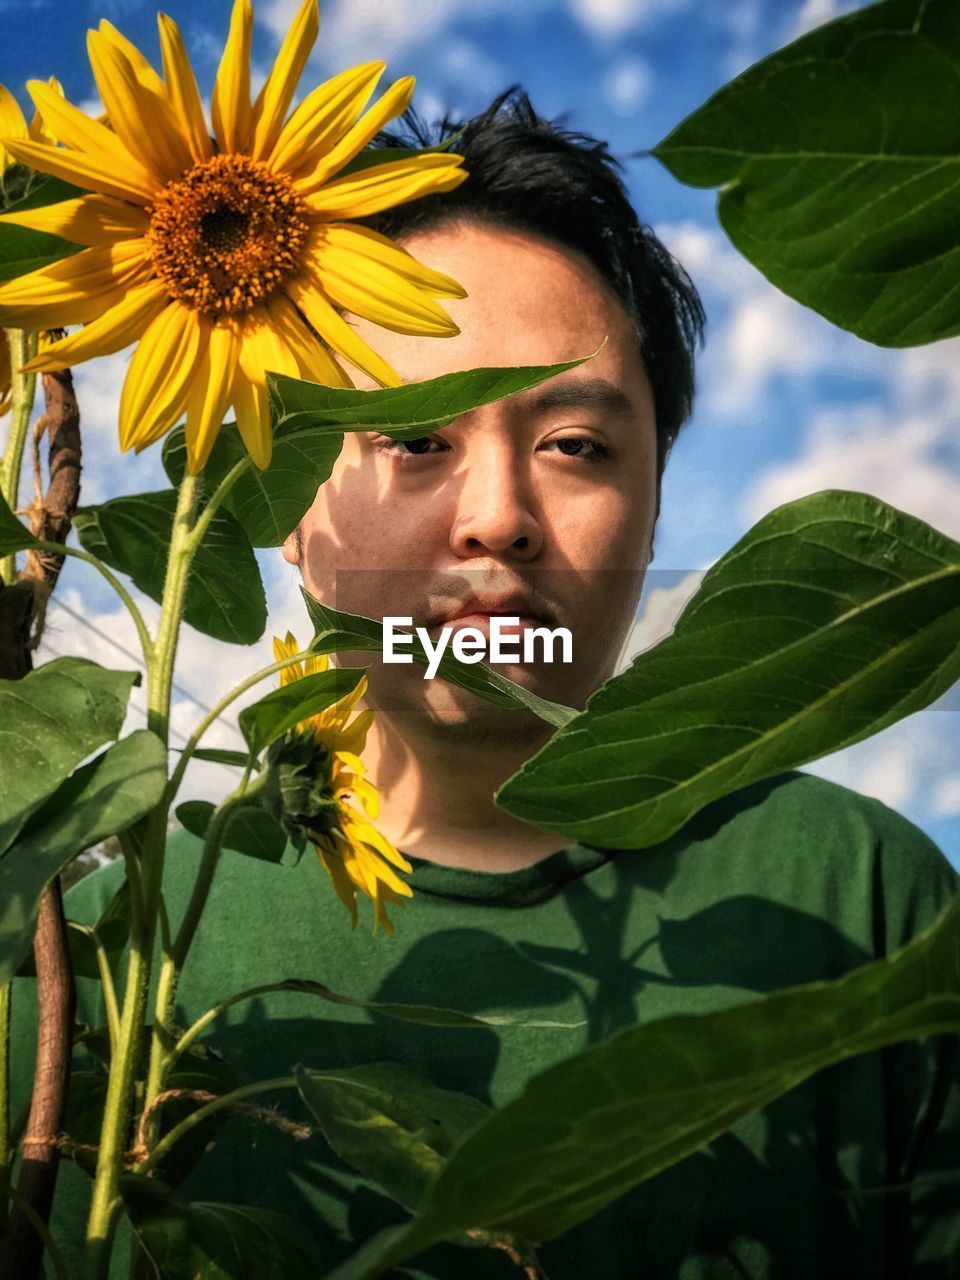 Close-up portrait of a young man behind sunflower against cloudy sky.